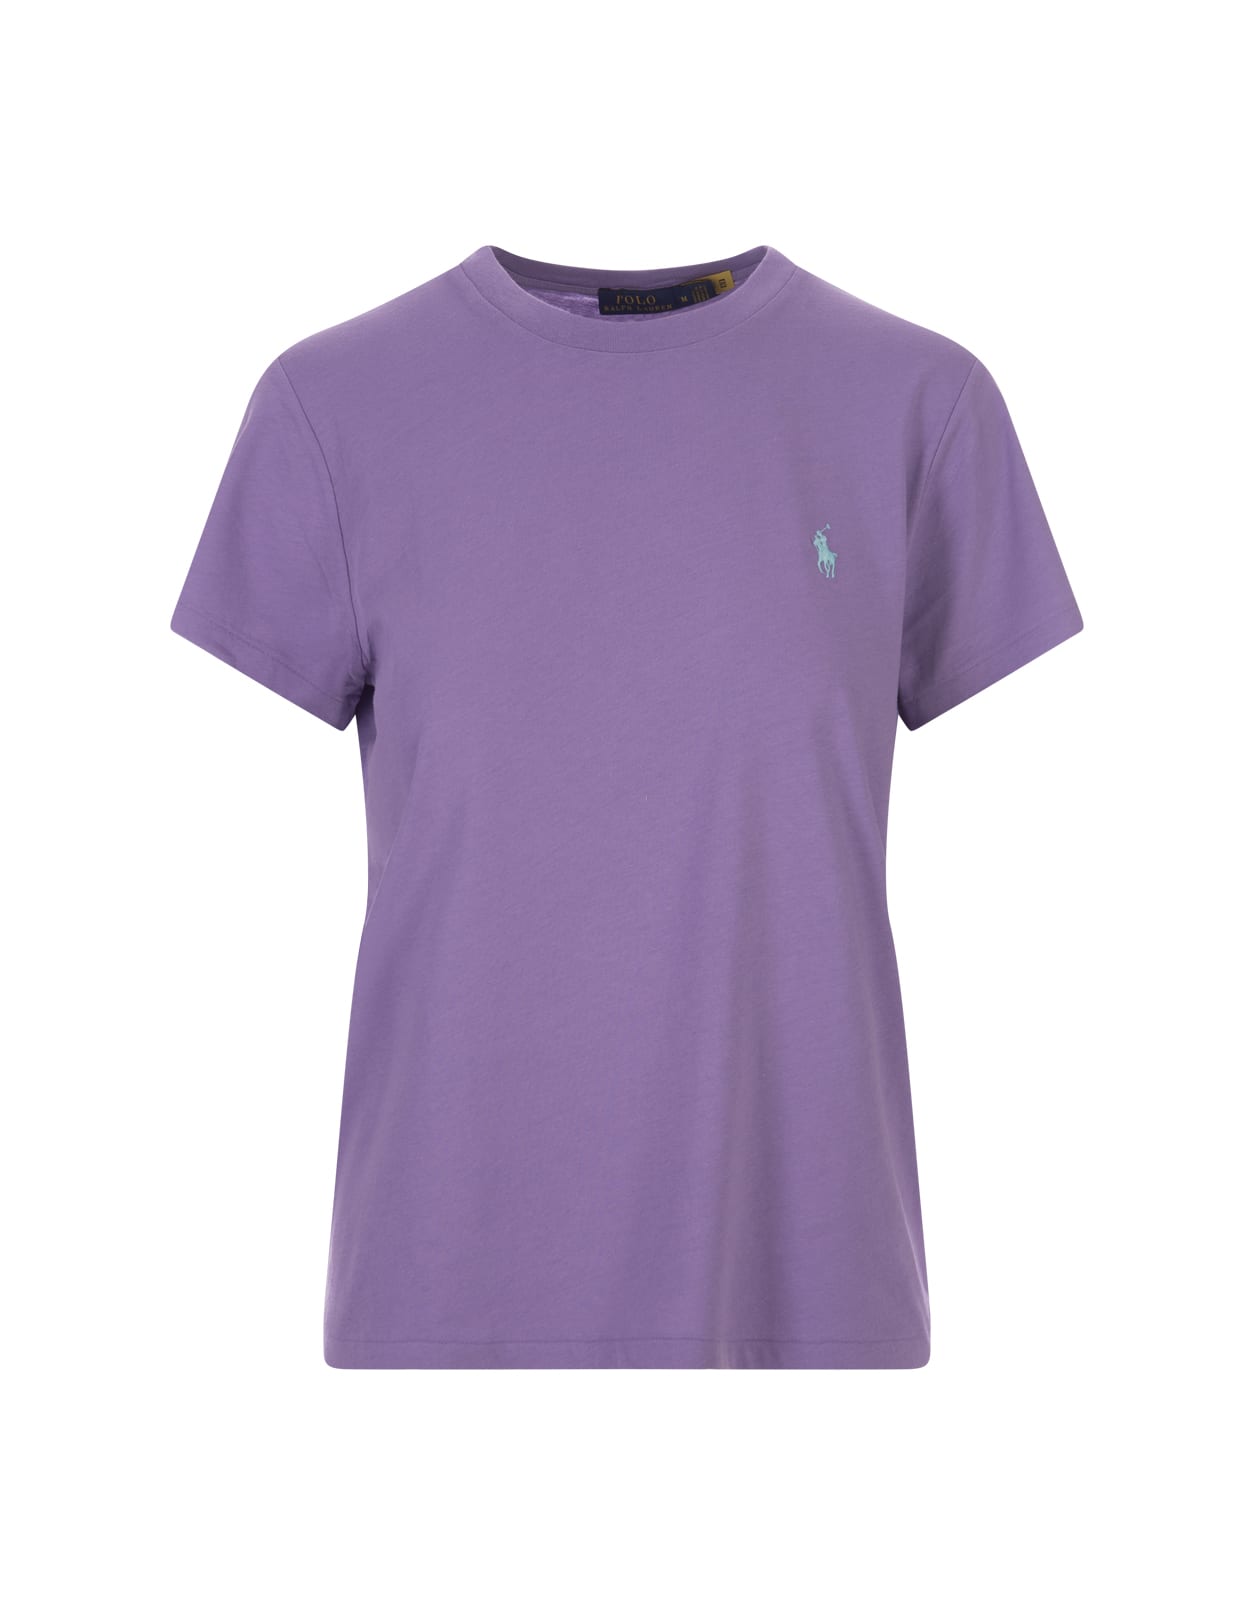 Ralph Lauren Purple T-shirt With Contrasting Pony In Wisteria